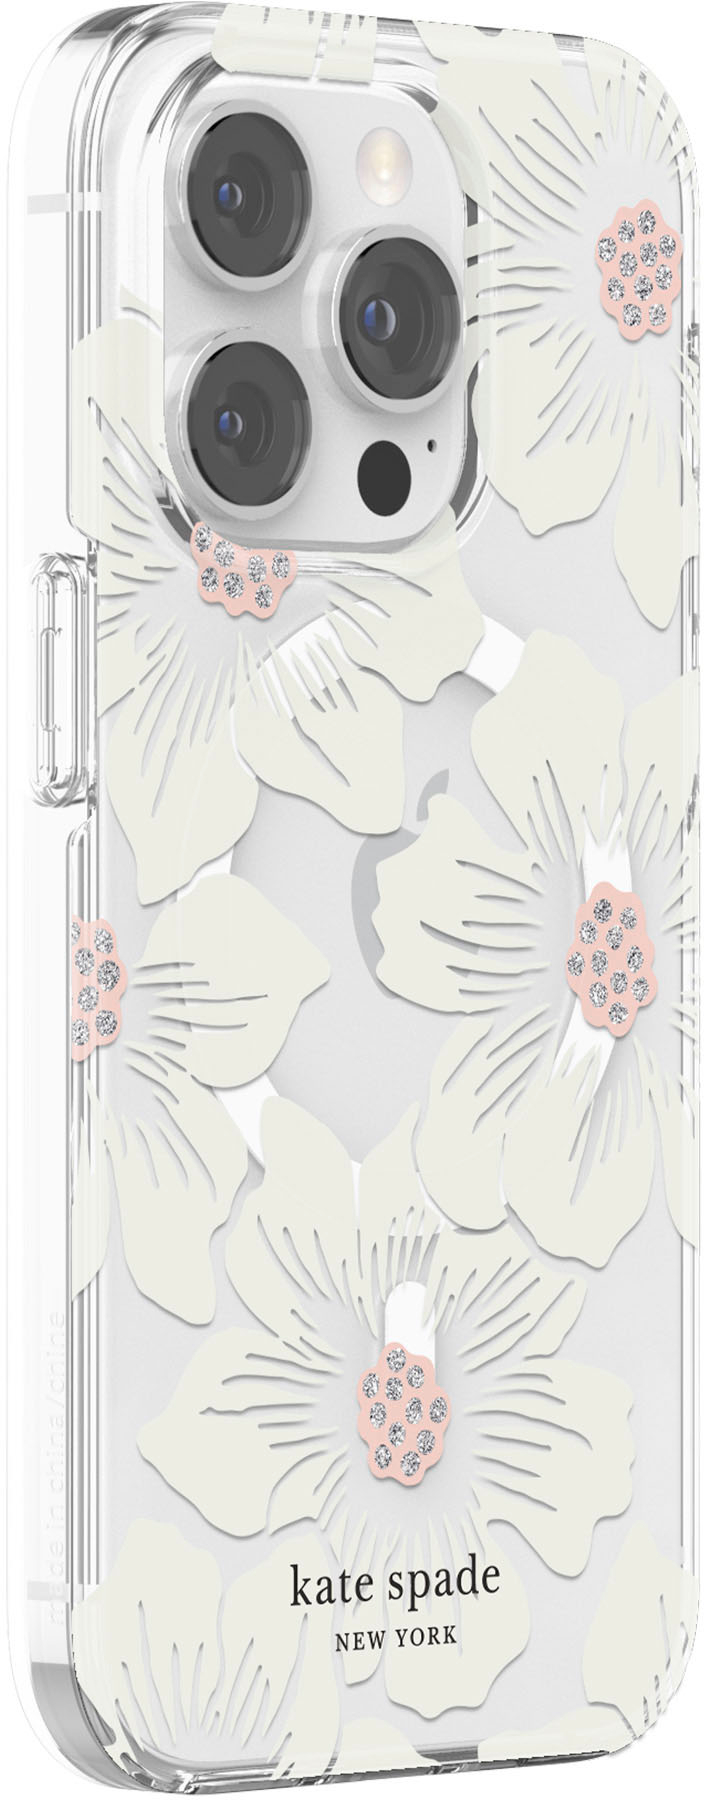  Kate Spade New York Protective Hardshell Case (1-PC Comold) for  iPhone 11 Pro - Hollyhock Floral Clear/Cream with Stones, Hollyhock Floral  Crystal Gems (KSIPH-130-HHCCS) : Cell Phones & Accessories